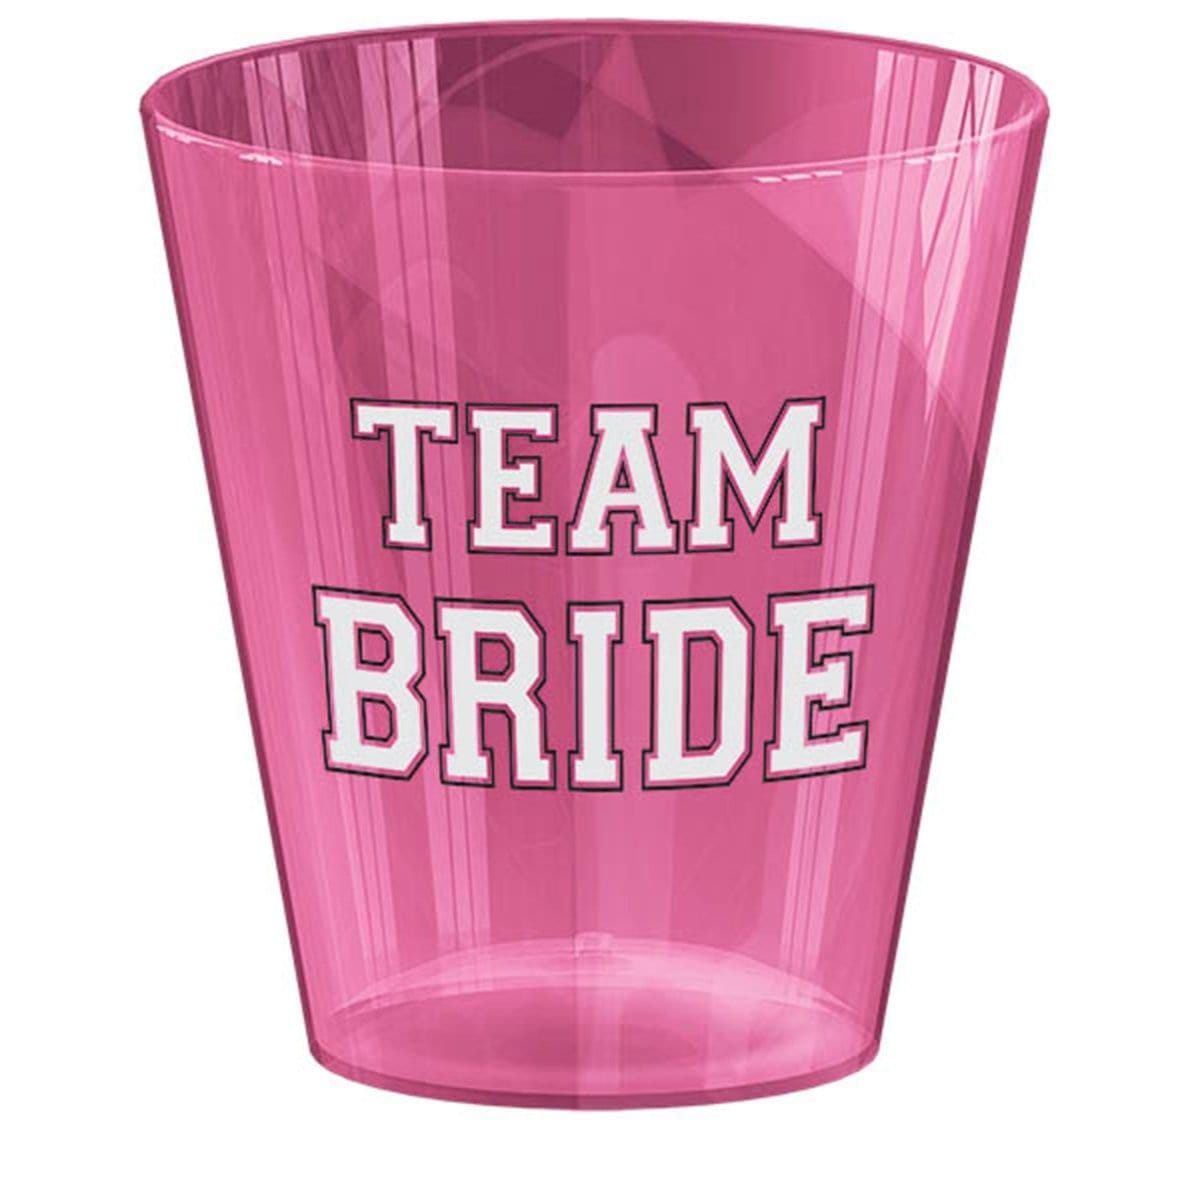 Buy Bachelorette Team Bride shooter glasses 2 ounces, 40 per package sold at Party Expert